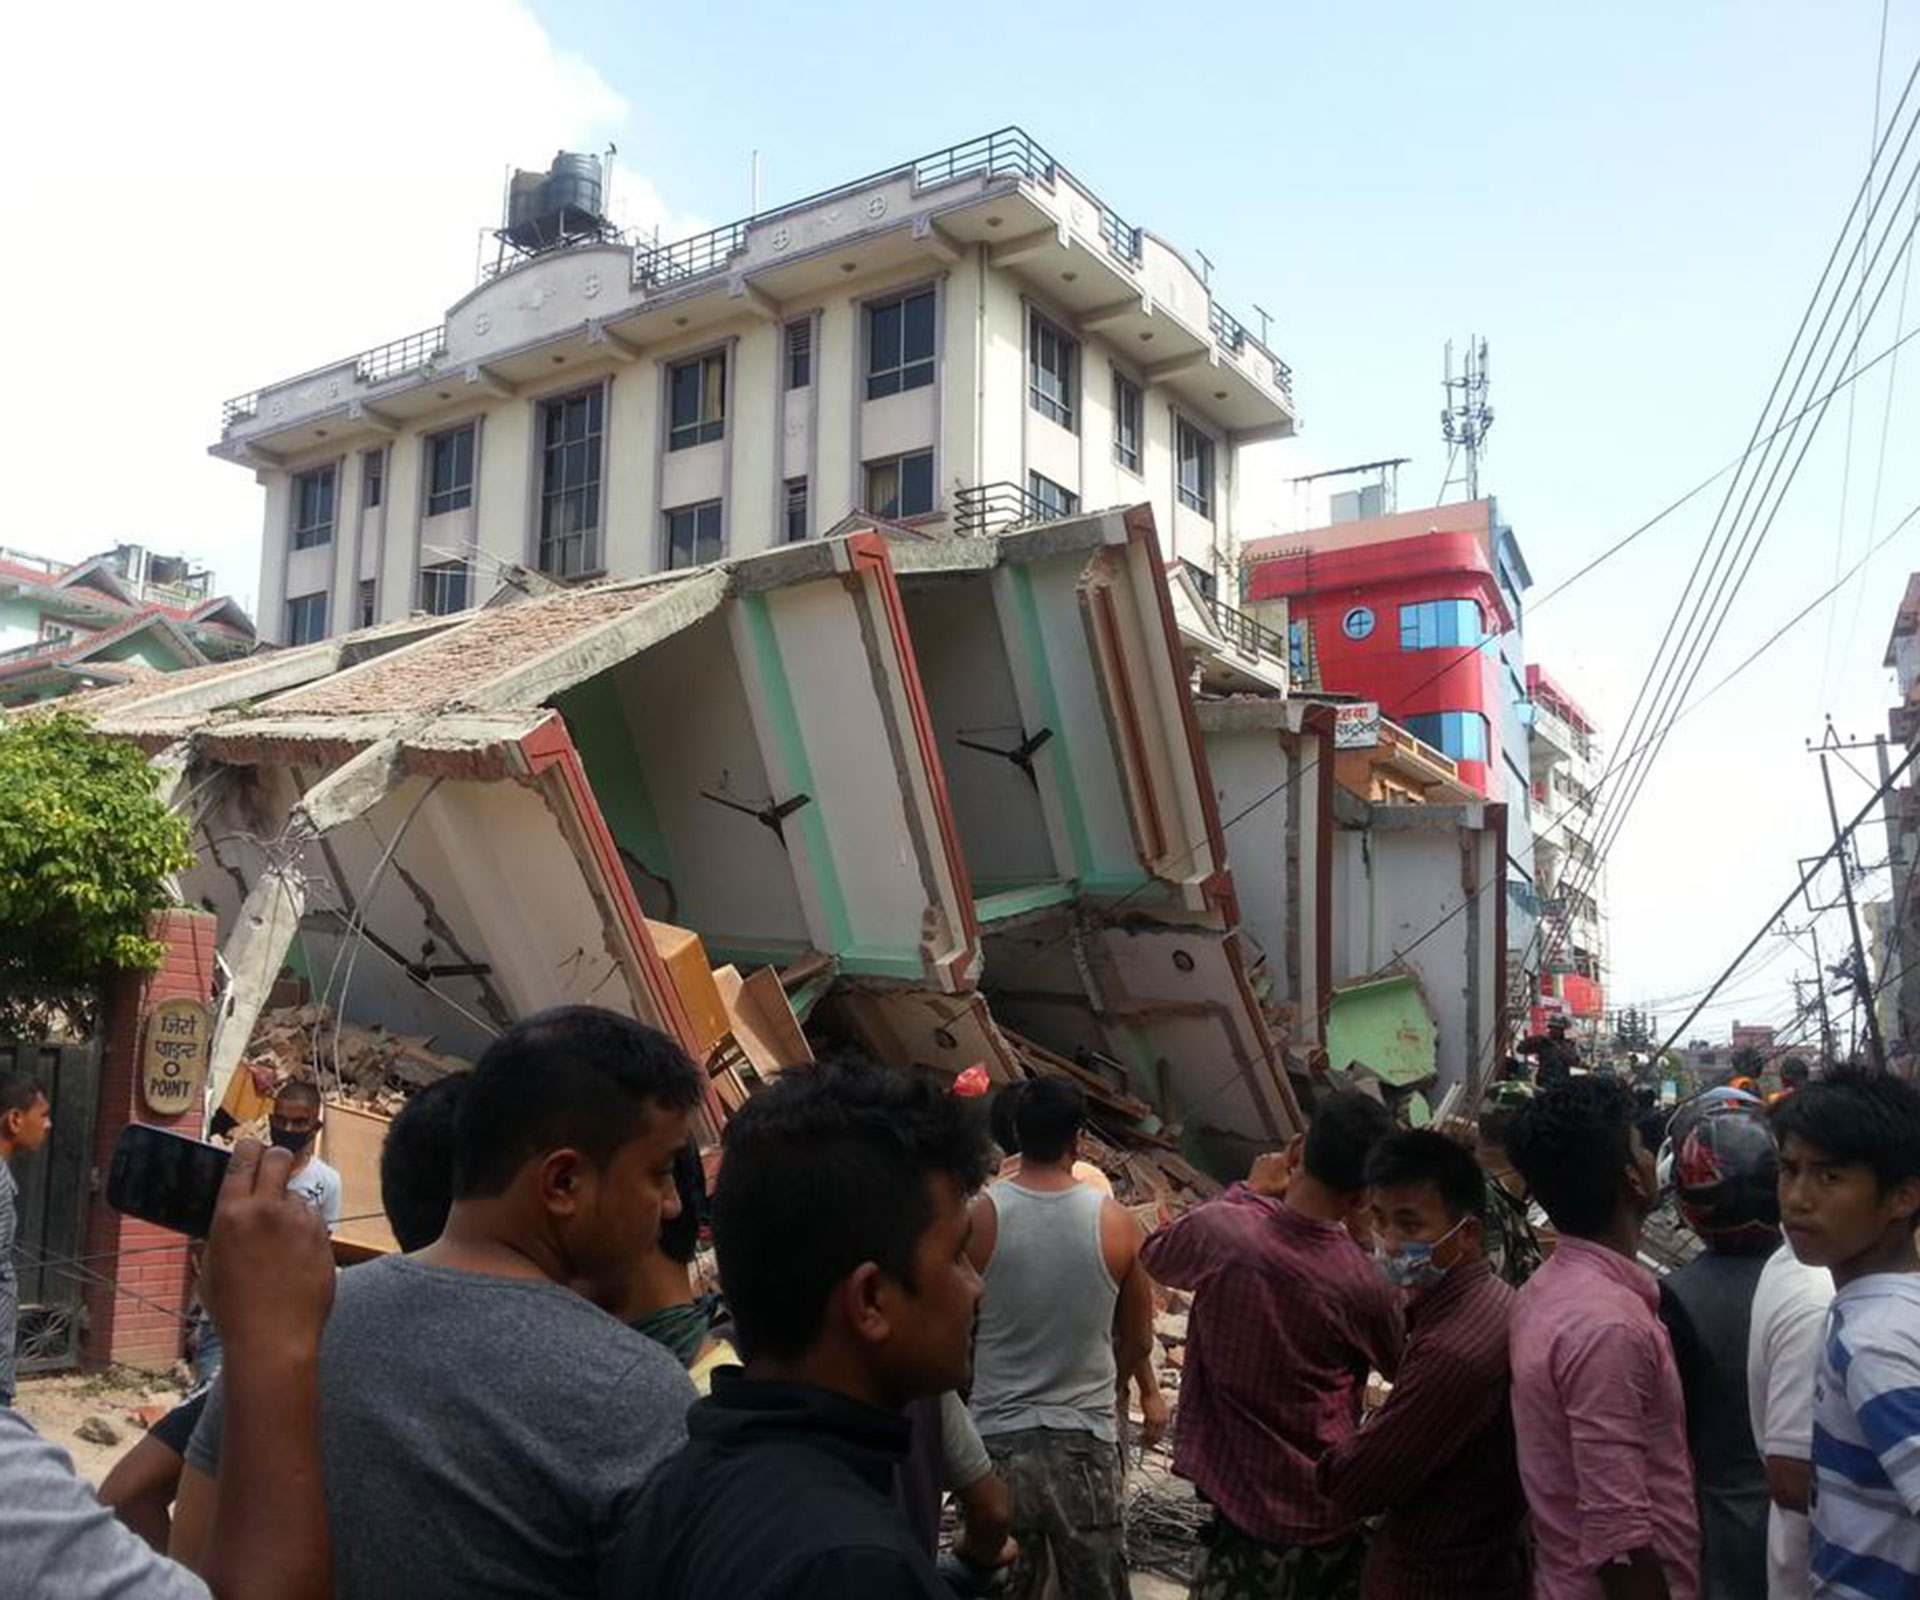 Second major earthquake strikes in Nepal